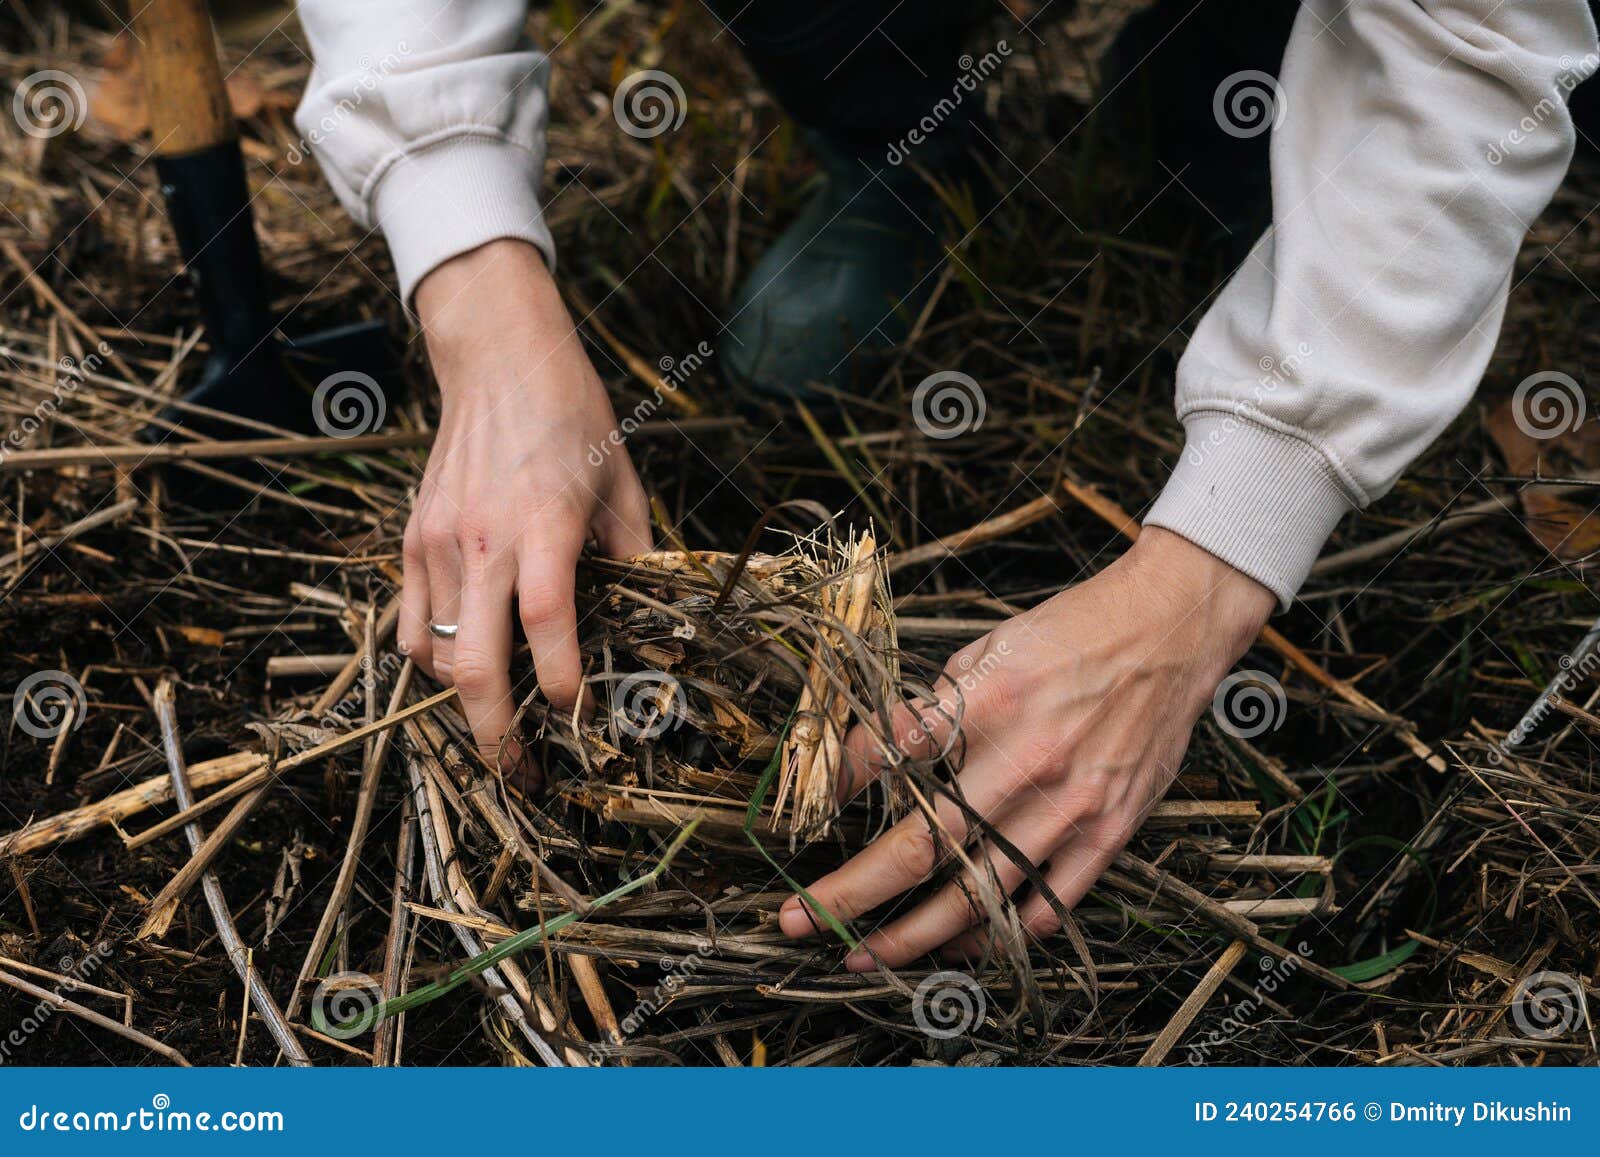 close-up hands of unrecognizable survivalist male putting brushwood on campfire to making fire in forest.